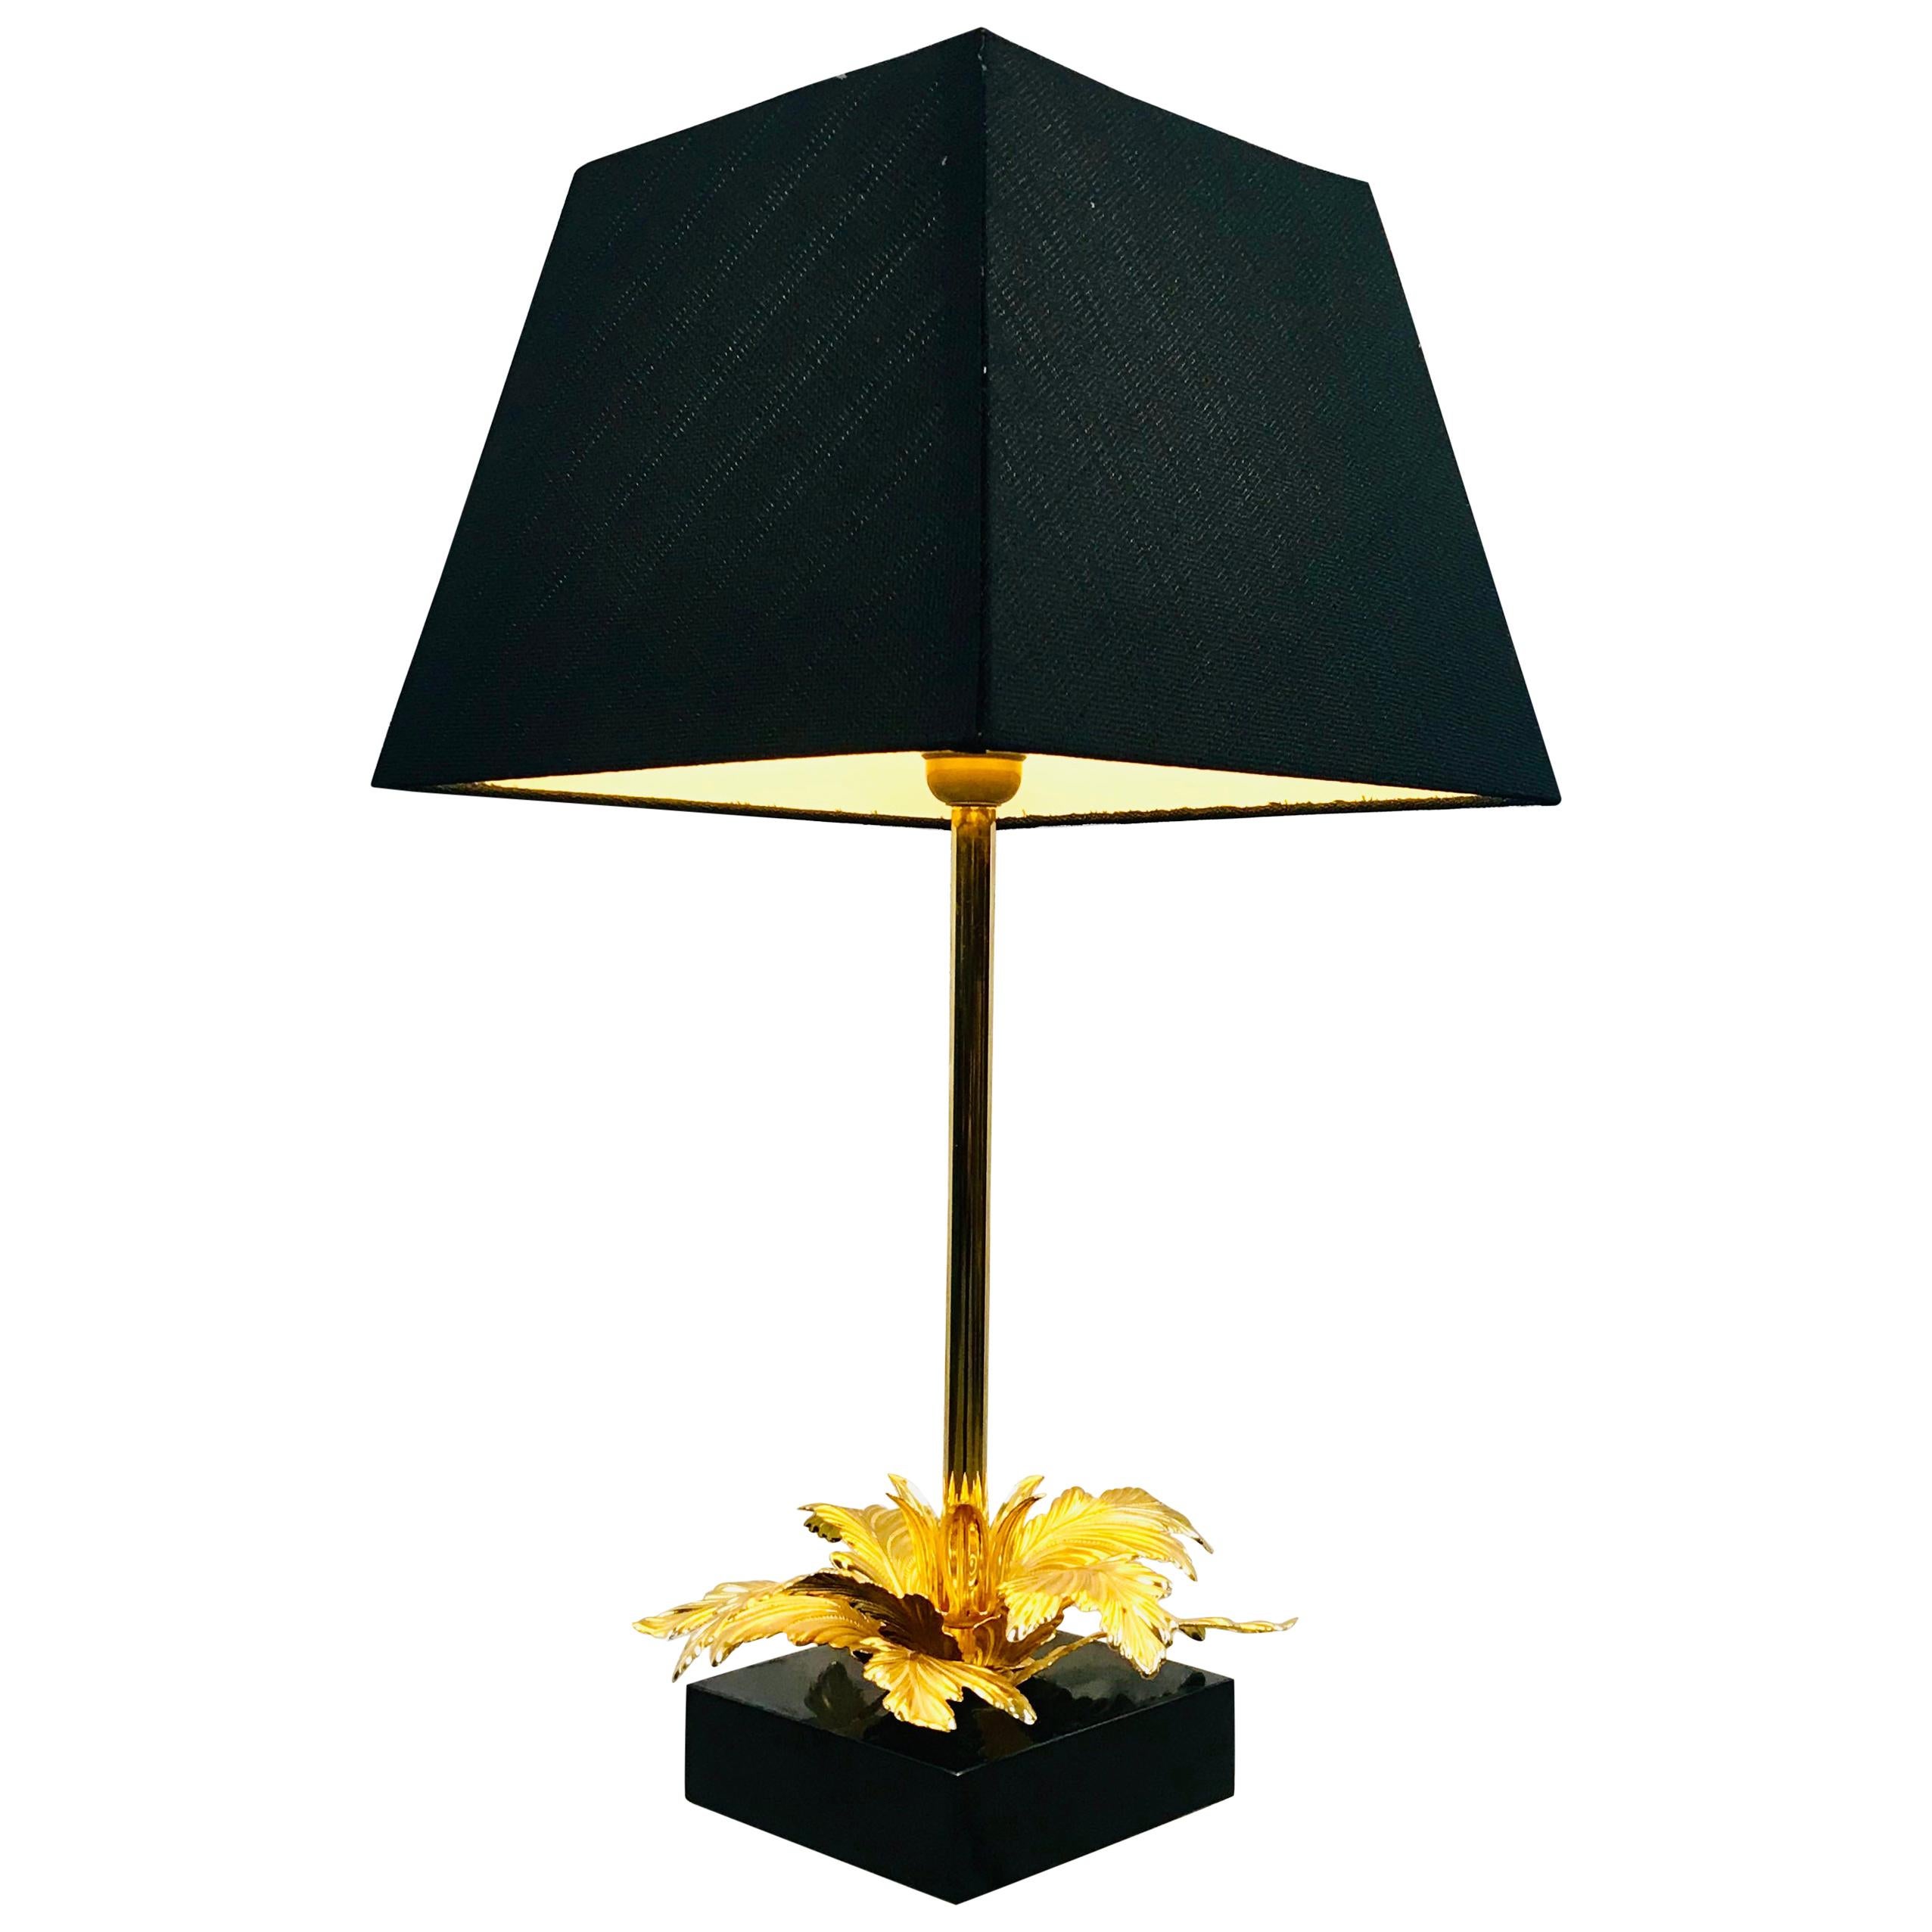 Vintage French Mid-Century Brass and Marble Table Lamp by Maison Jansen, 1970s For Sale